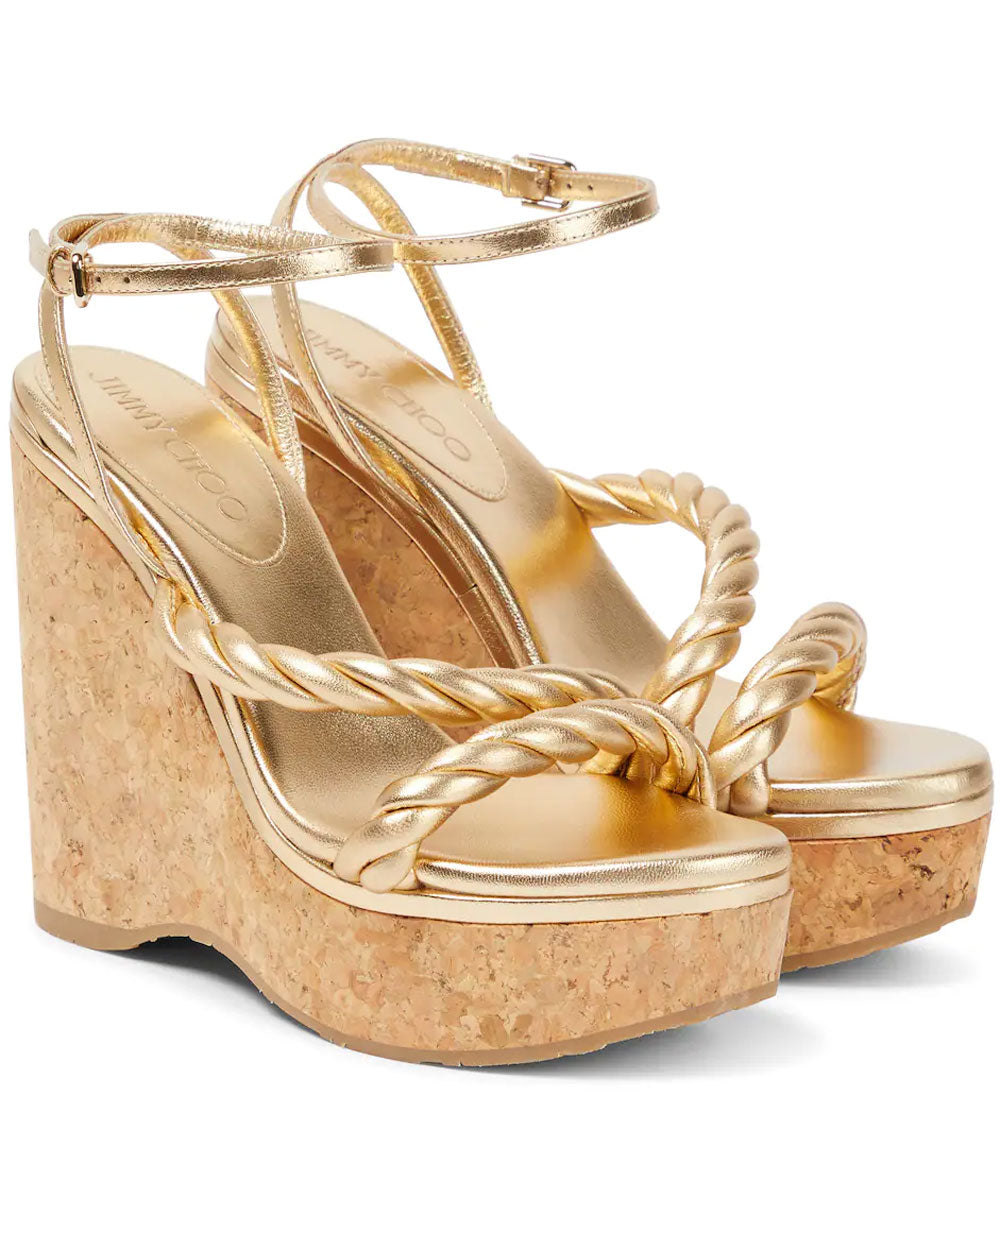 Diosa Wedge Sandal in Gold